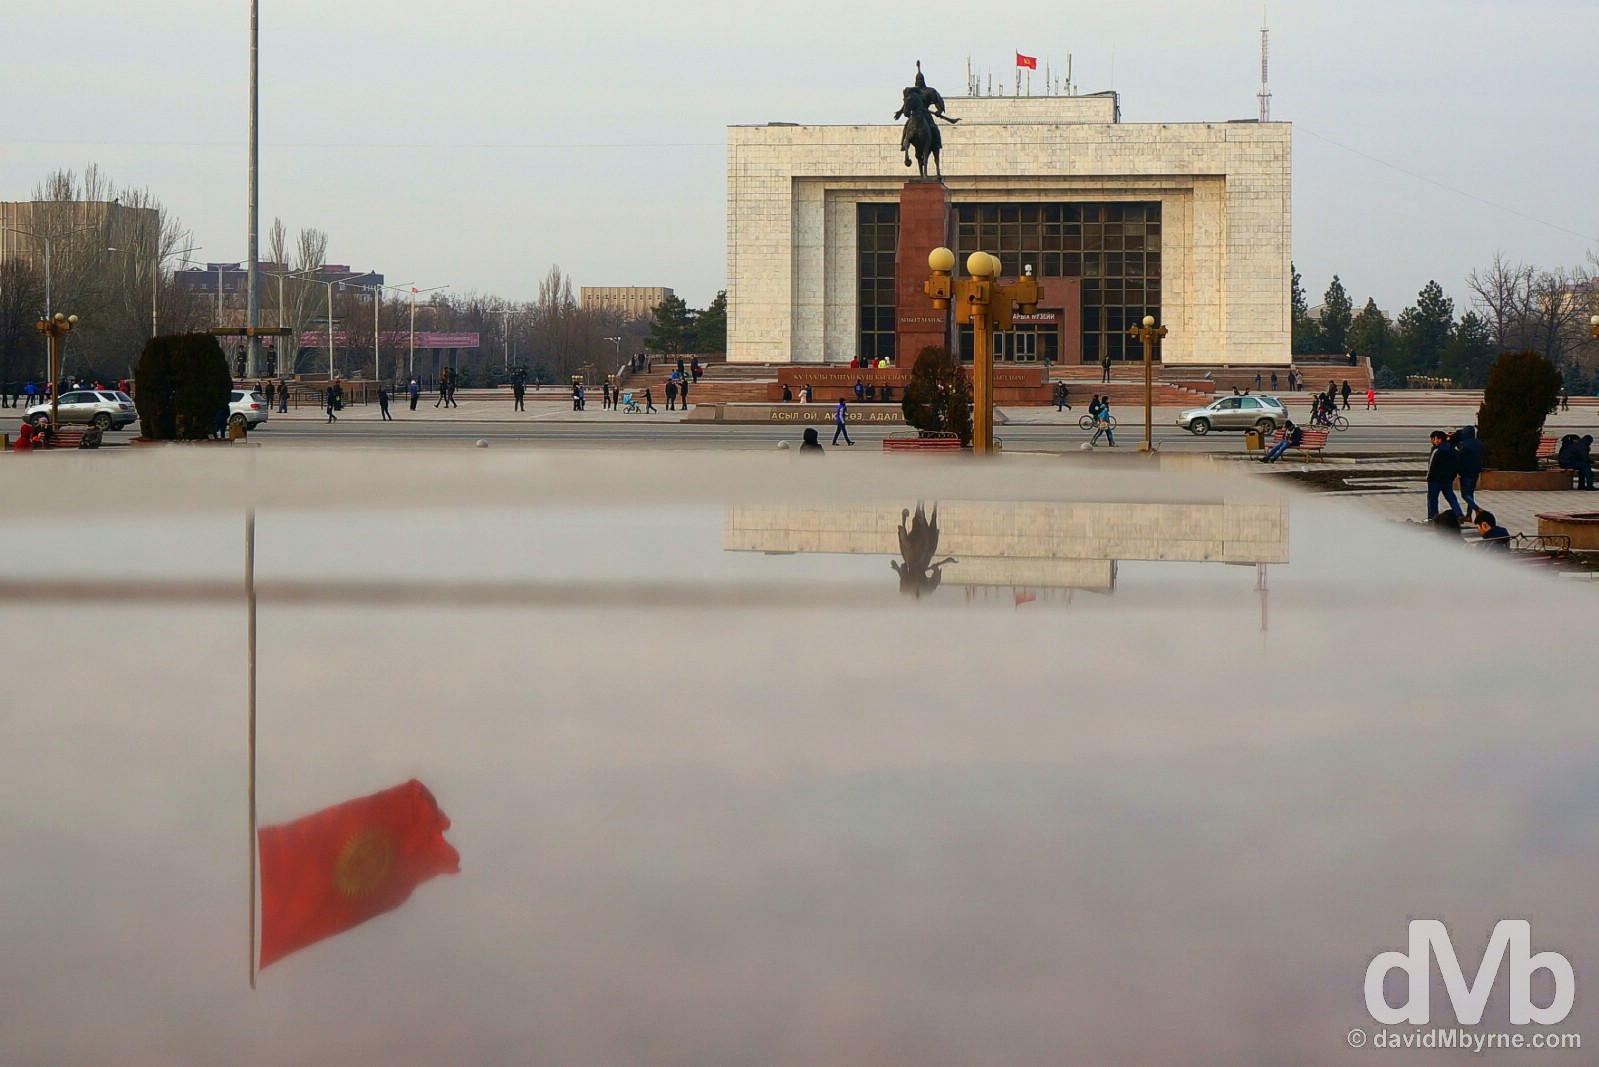 Reflections in Ala-Too Square in central Bishkek, Kyrgyzstan. February 23, 2015. 